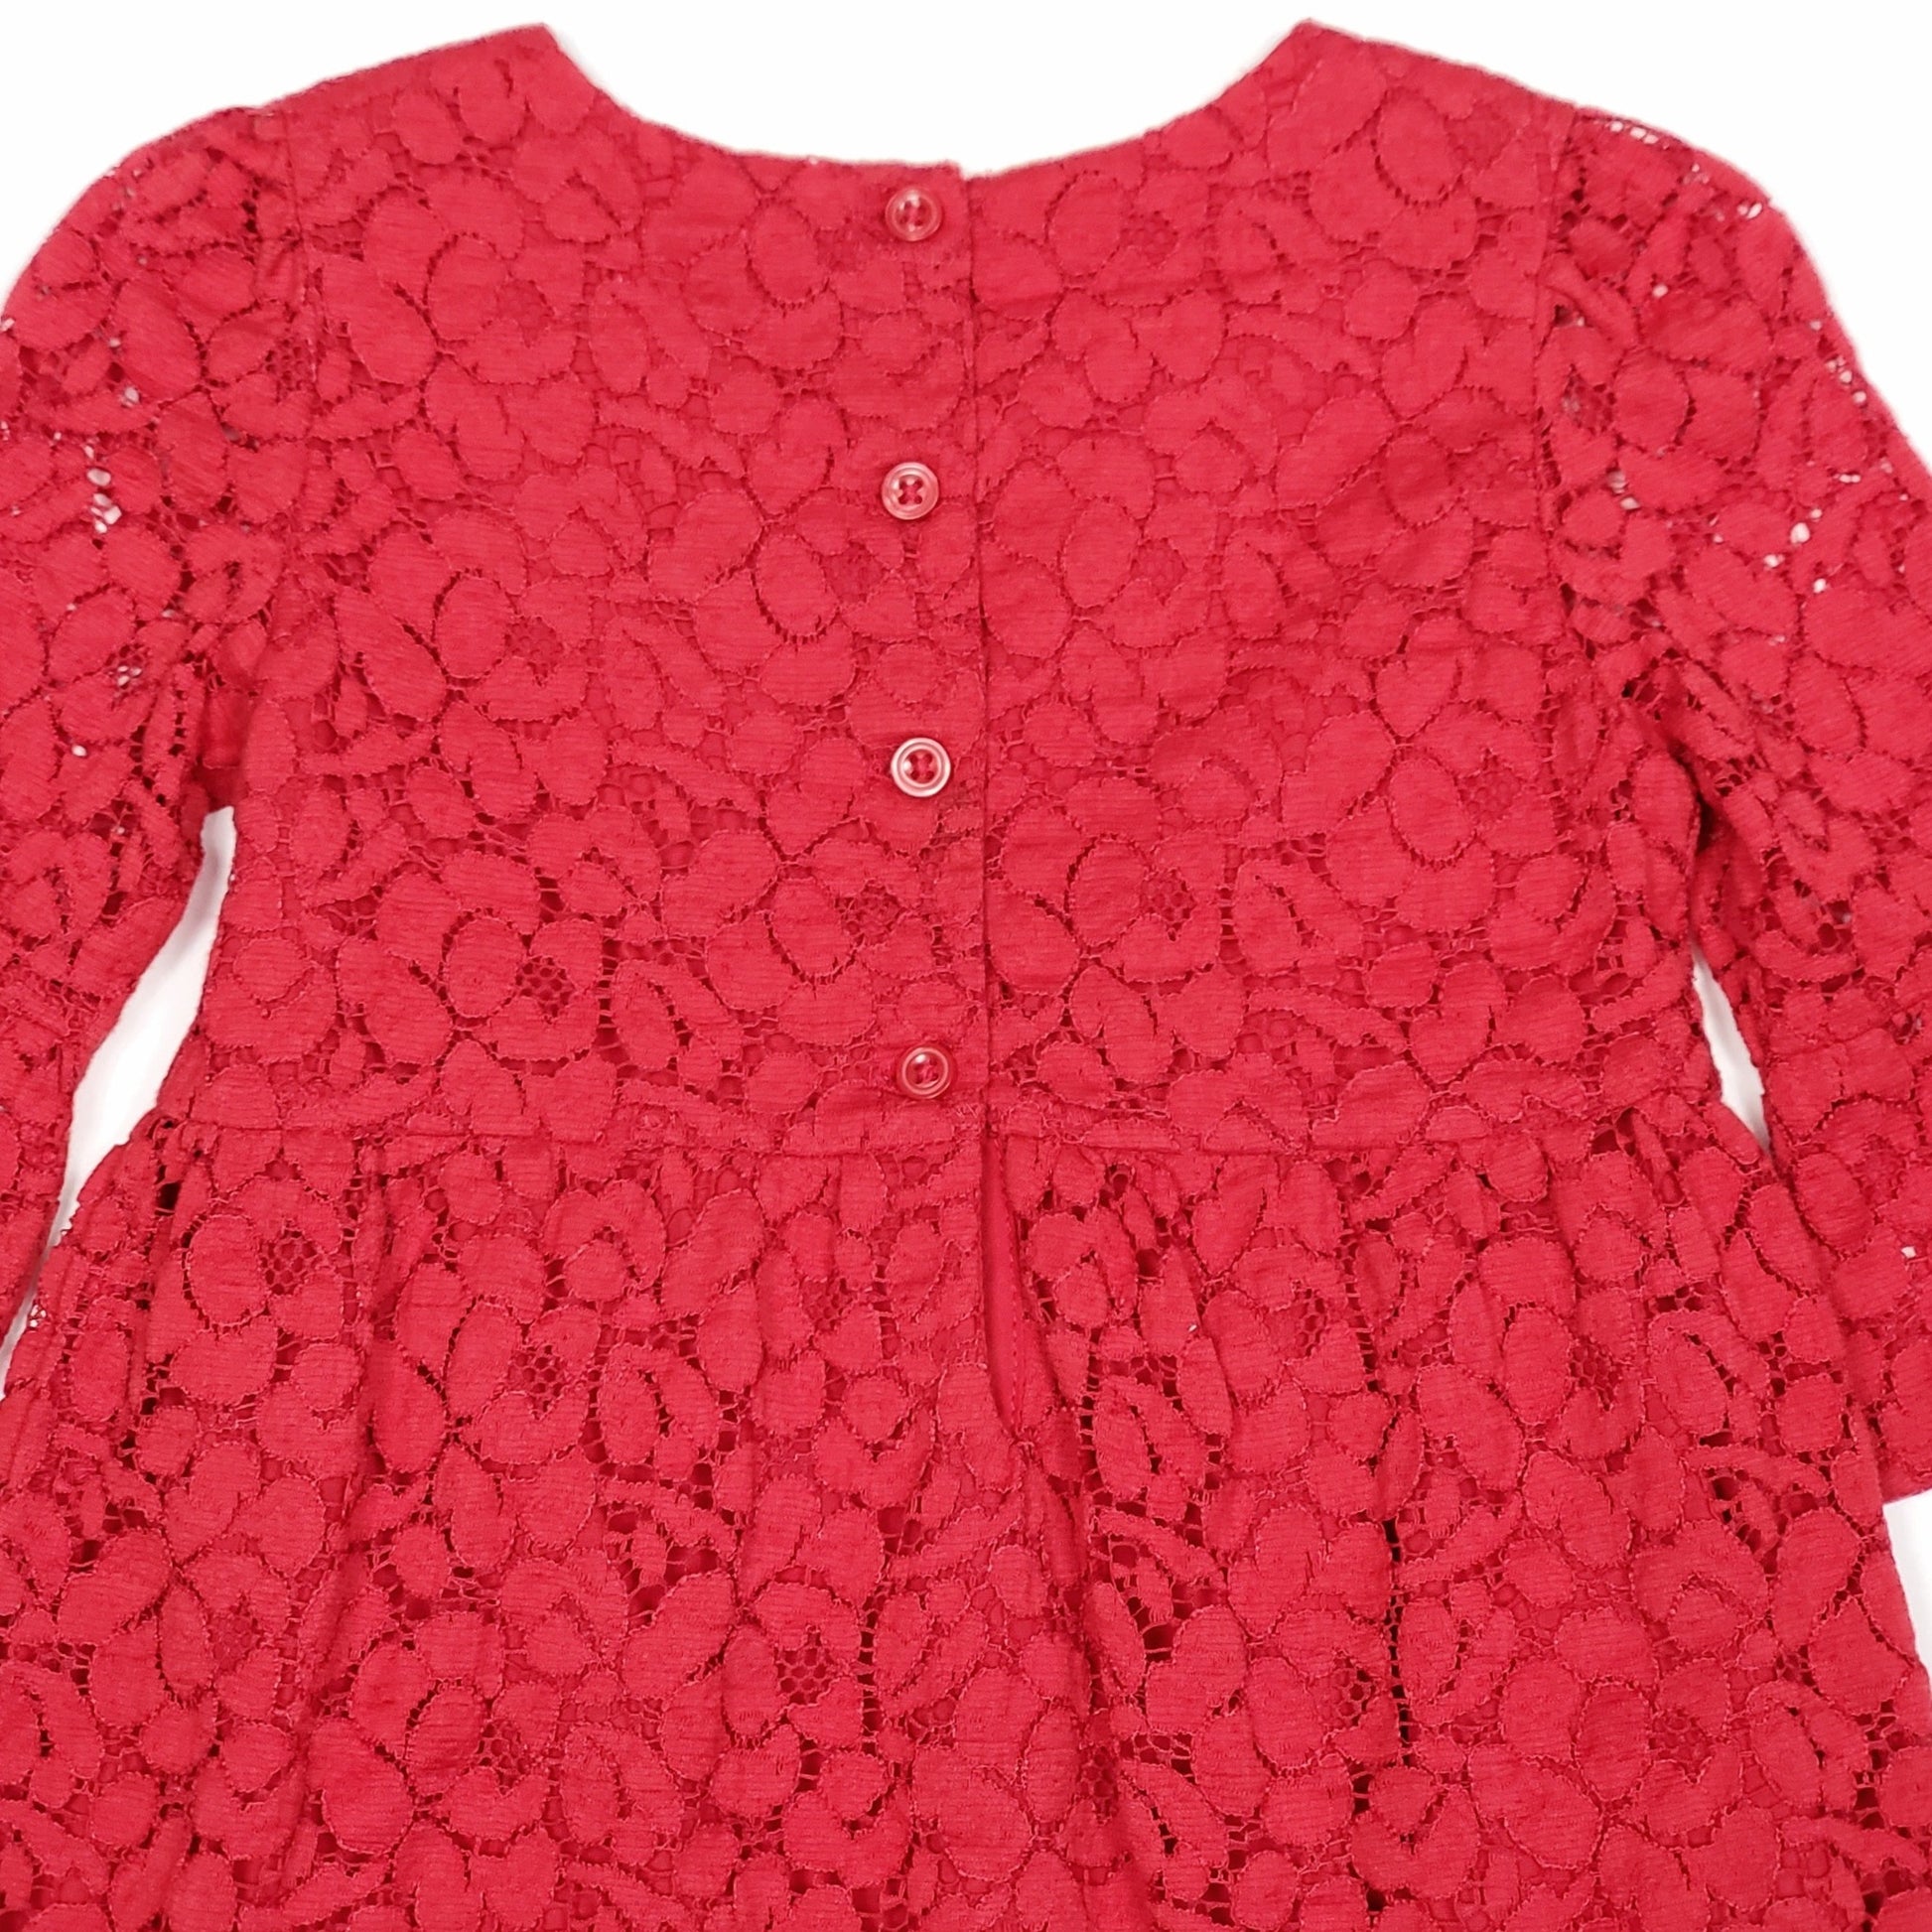 Baby Gap Girls Red Eyelet Floral Dress Size 2 Used, back close-up